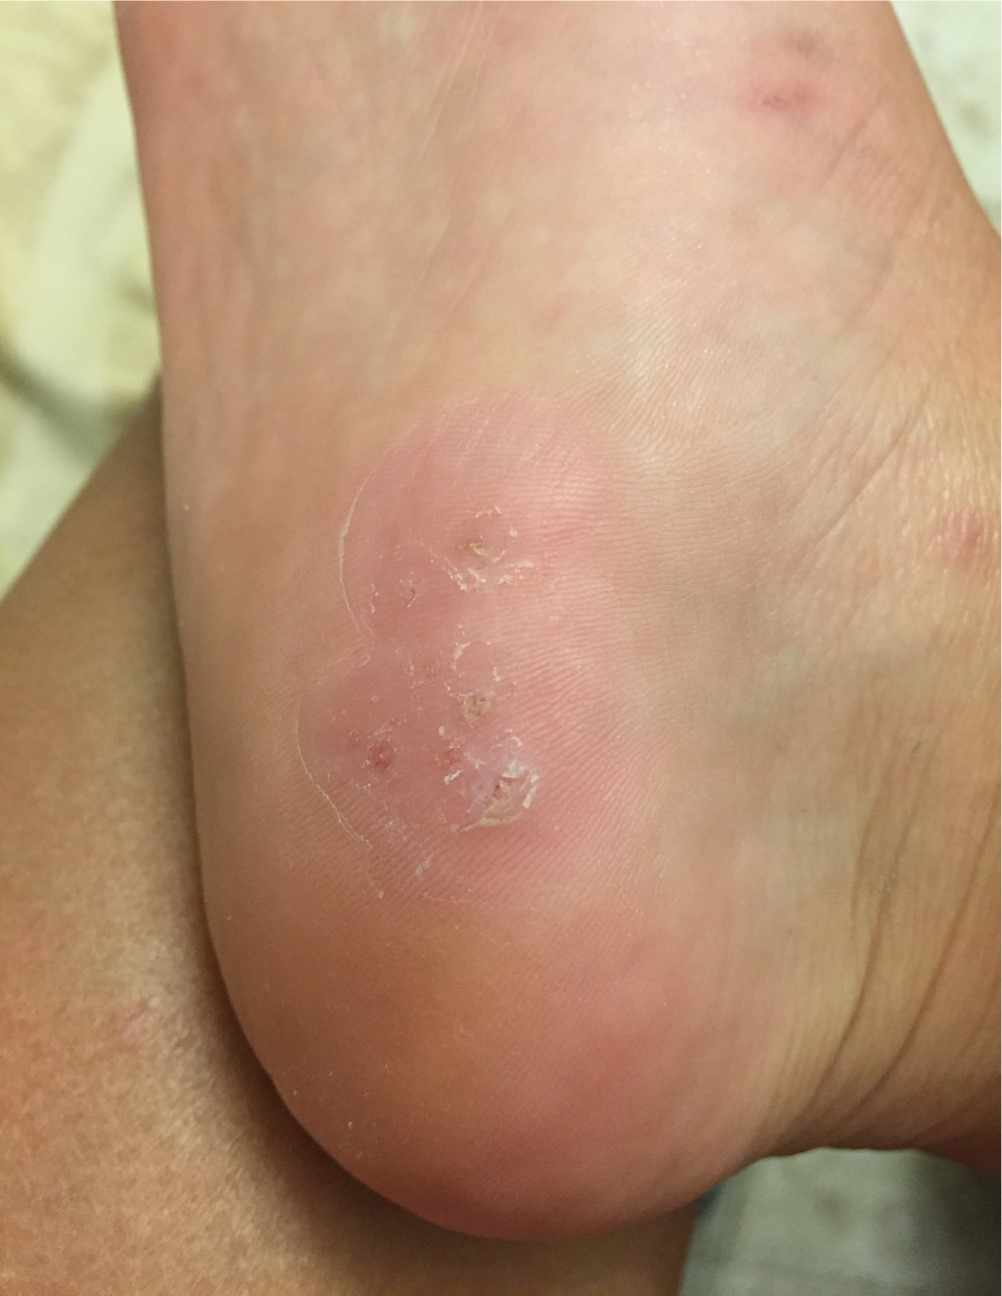 wart on foot or blister